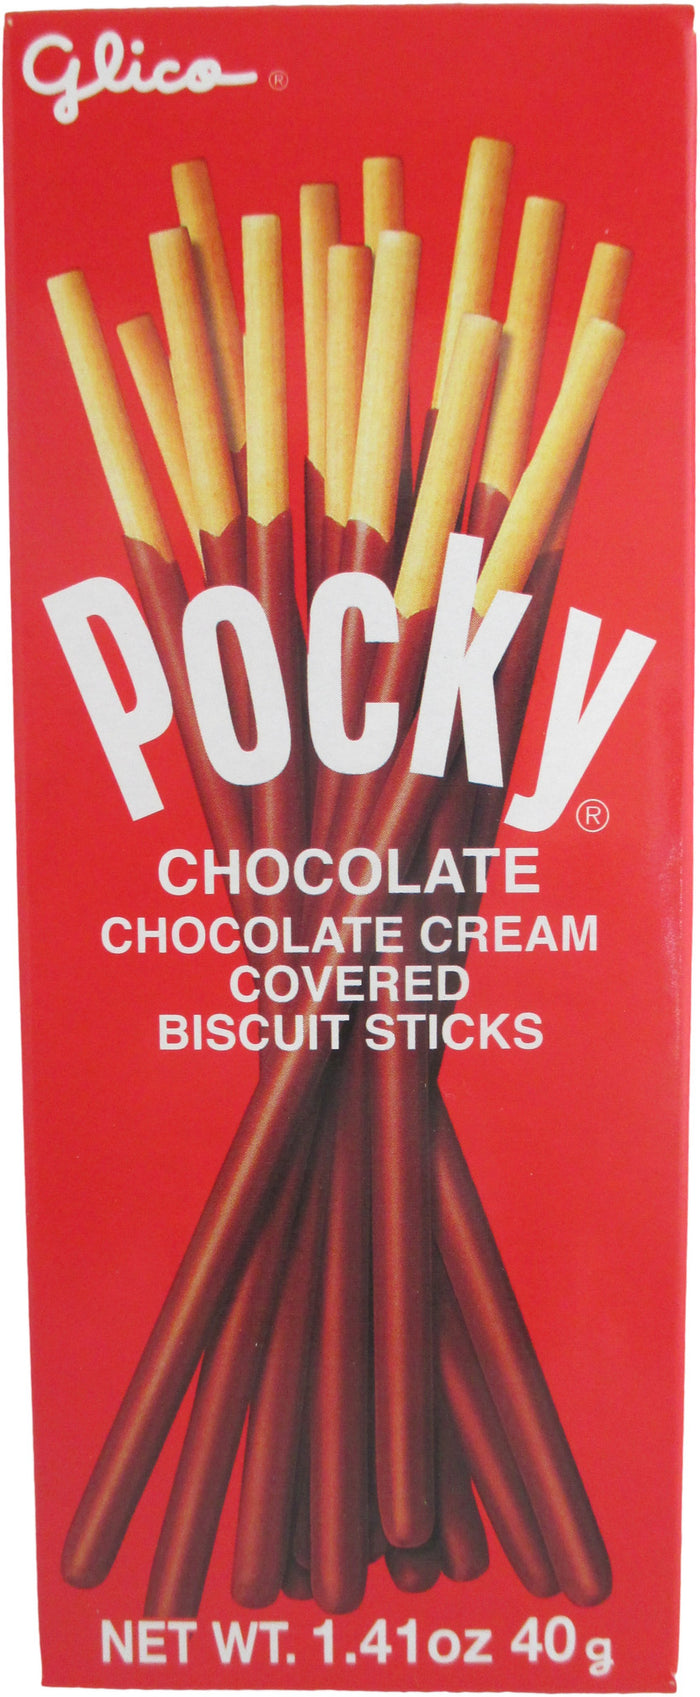 Glico Pocky - Chocolate Cream Covered Biscuit Sticks - 1.41 oz / 40 g - Asiangrocery2yourdoor